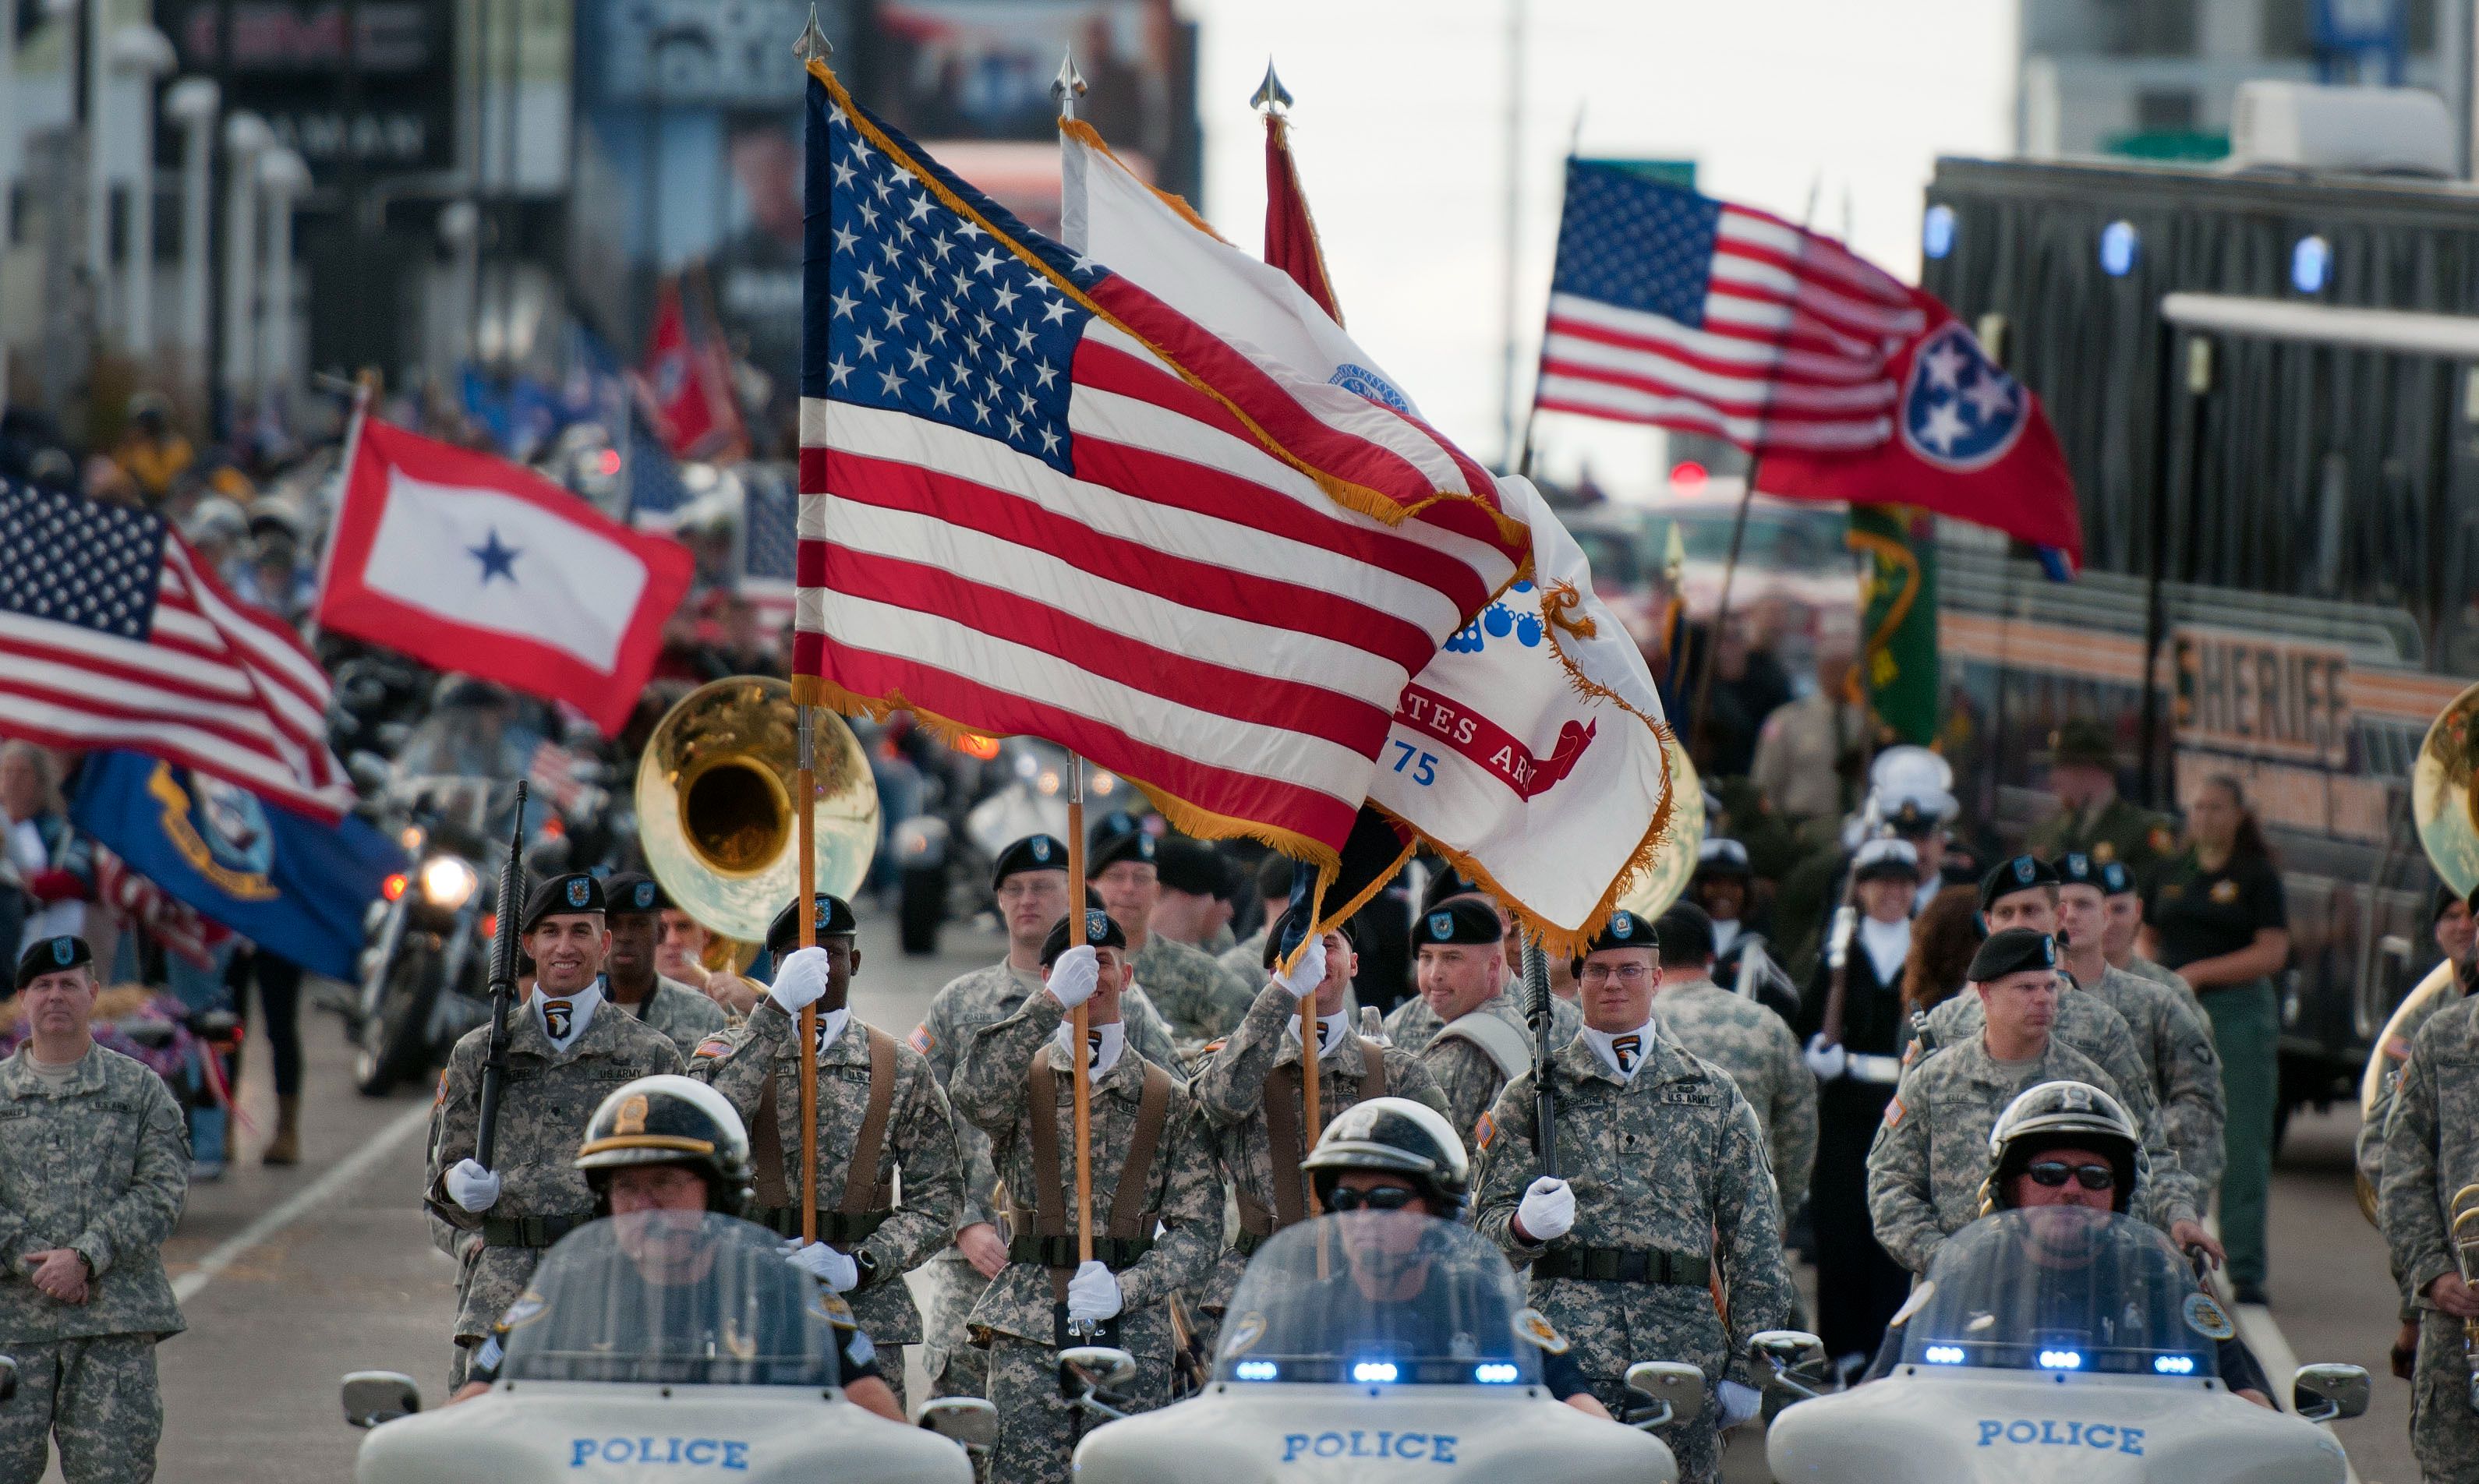 Soldiers assigned to the 101st Airborne Division (Air Assault) Honor Guard of Fort Campbell, Ky., lead the 2012 Veterans Day parade in downtown Nashville, Tenn. Thousands of veterans took part in the event which was the largest in the state. Some were on horseback, others were on motorcycles or in classic cars. Along the streets, people were lined up with their American flags and signs of support for the military. (U.S. Army Photo by Staff Sgt. Russell Lee Klika 118th MPAD)